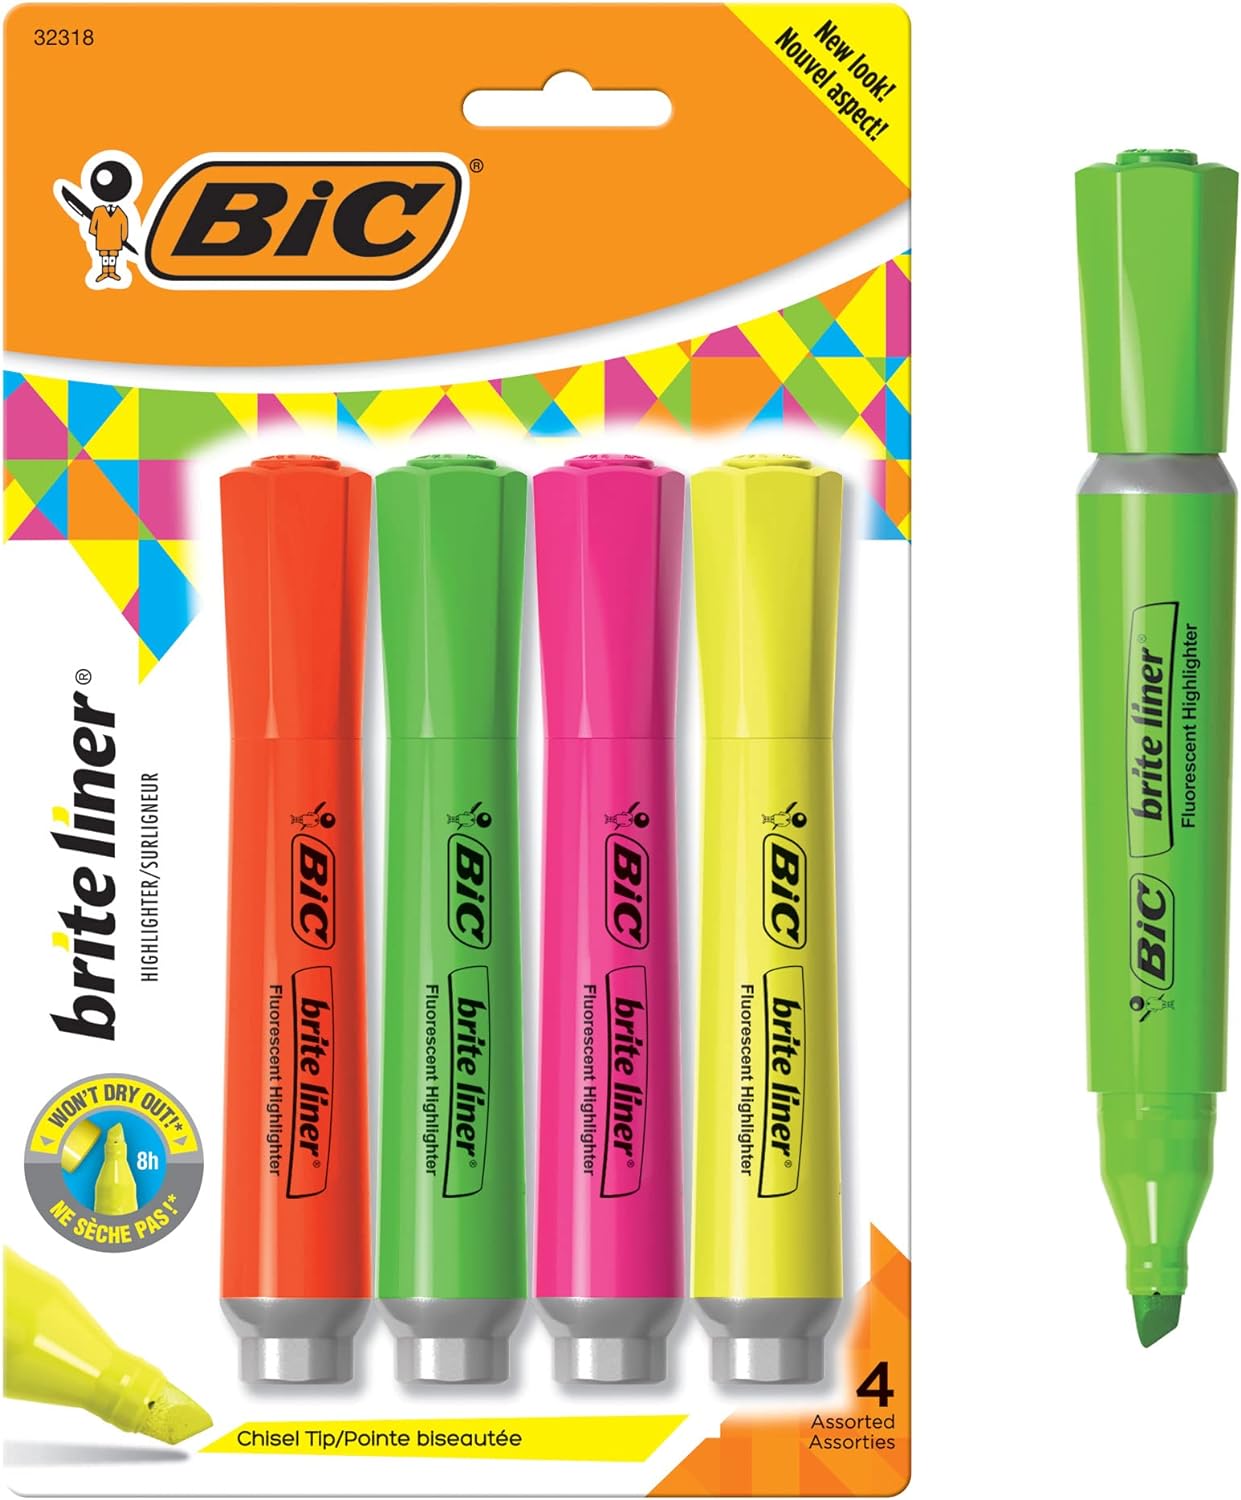 I bought these for my own personal use and some for my kids teachers and they are such great quality and will definitely order more in the very near future.